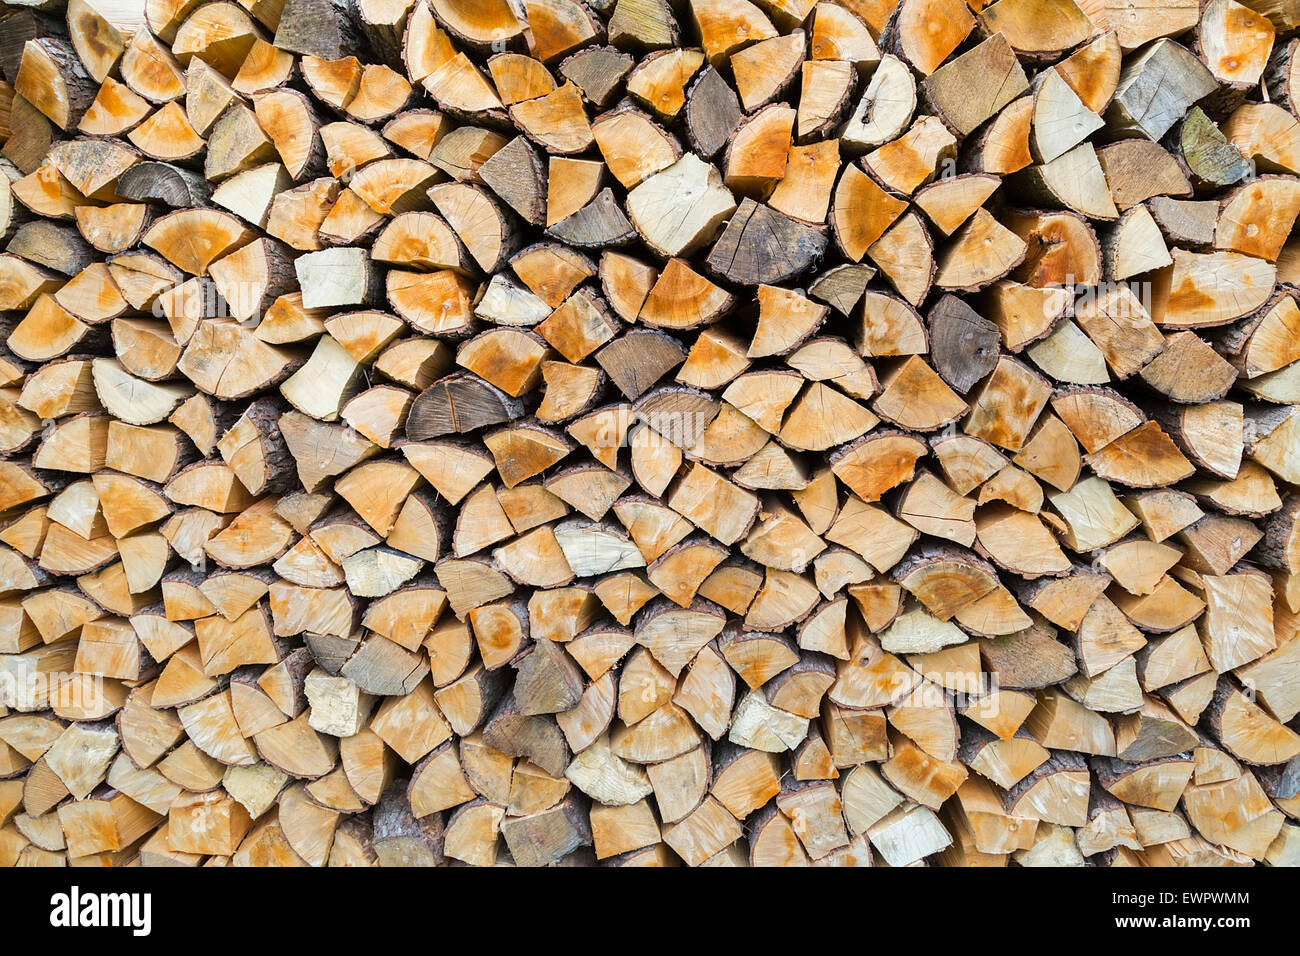 Pile of firewood as tree trunks storage for burning in winter Stock Photo